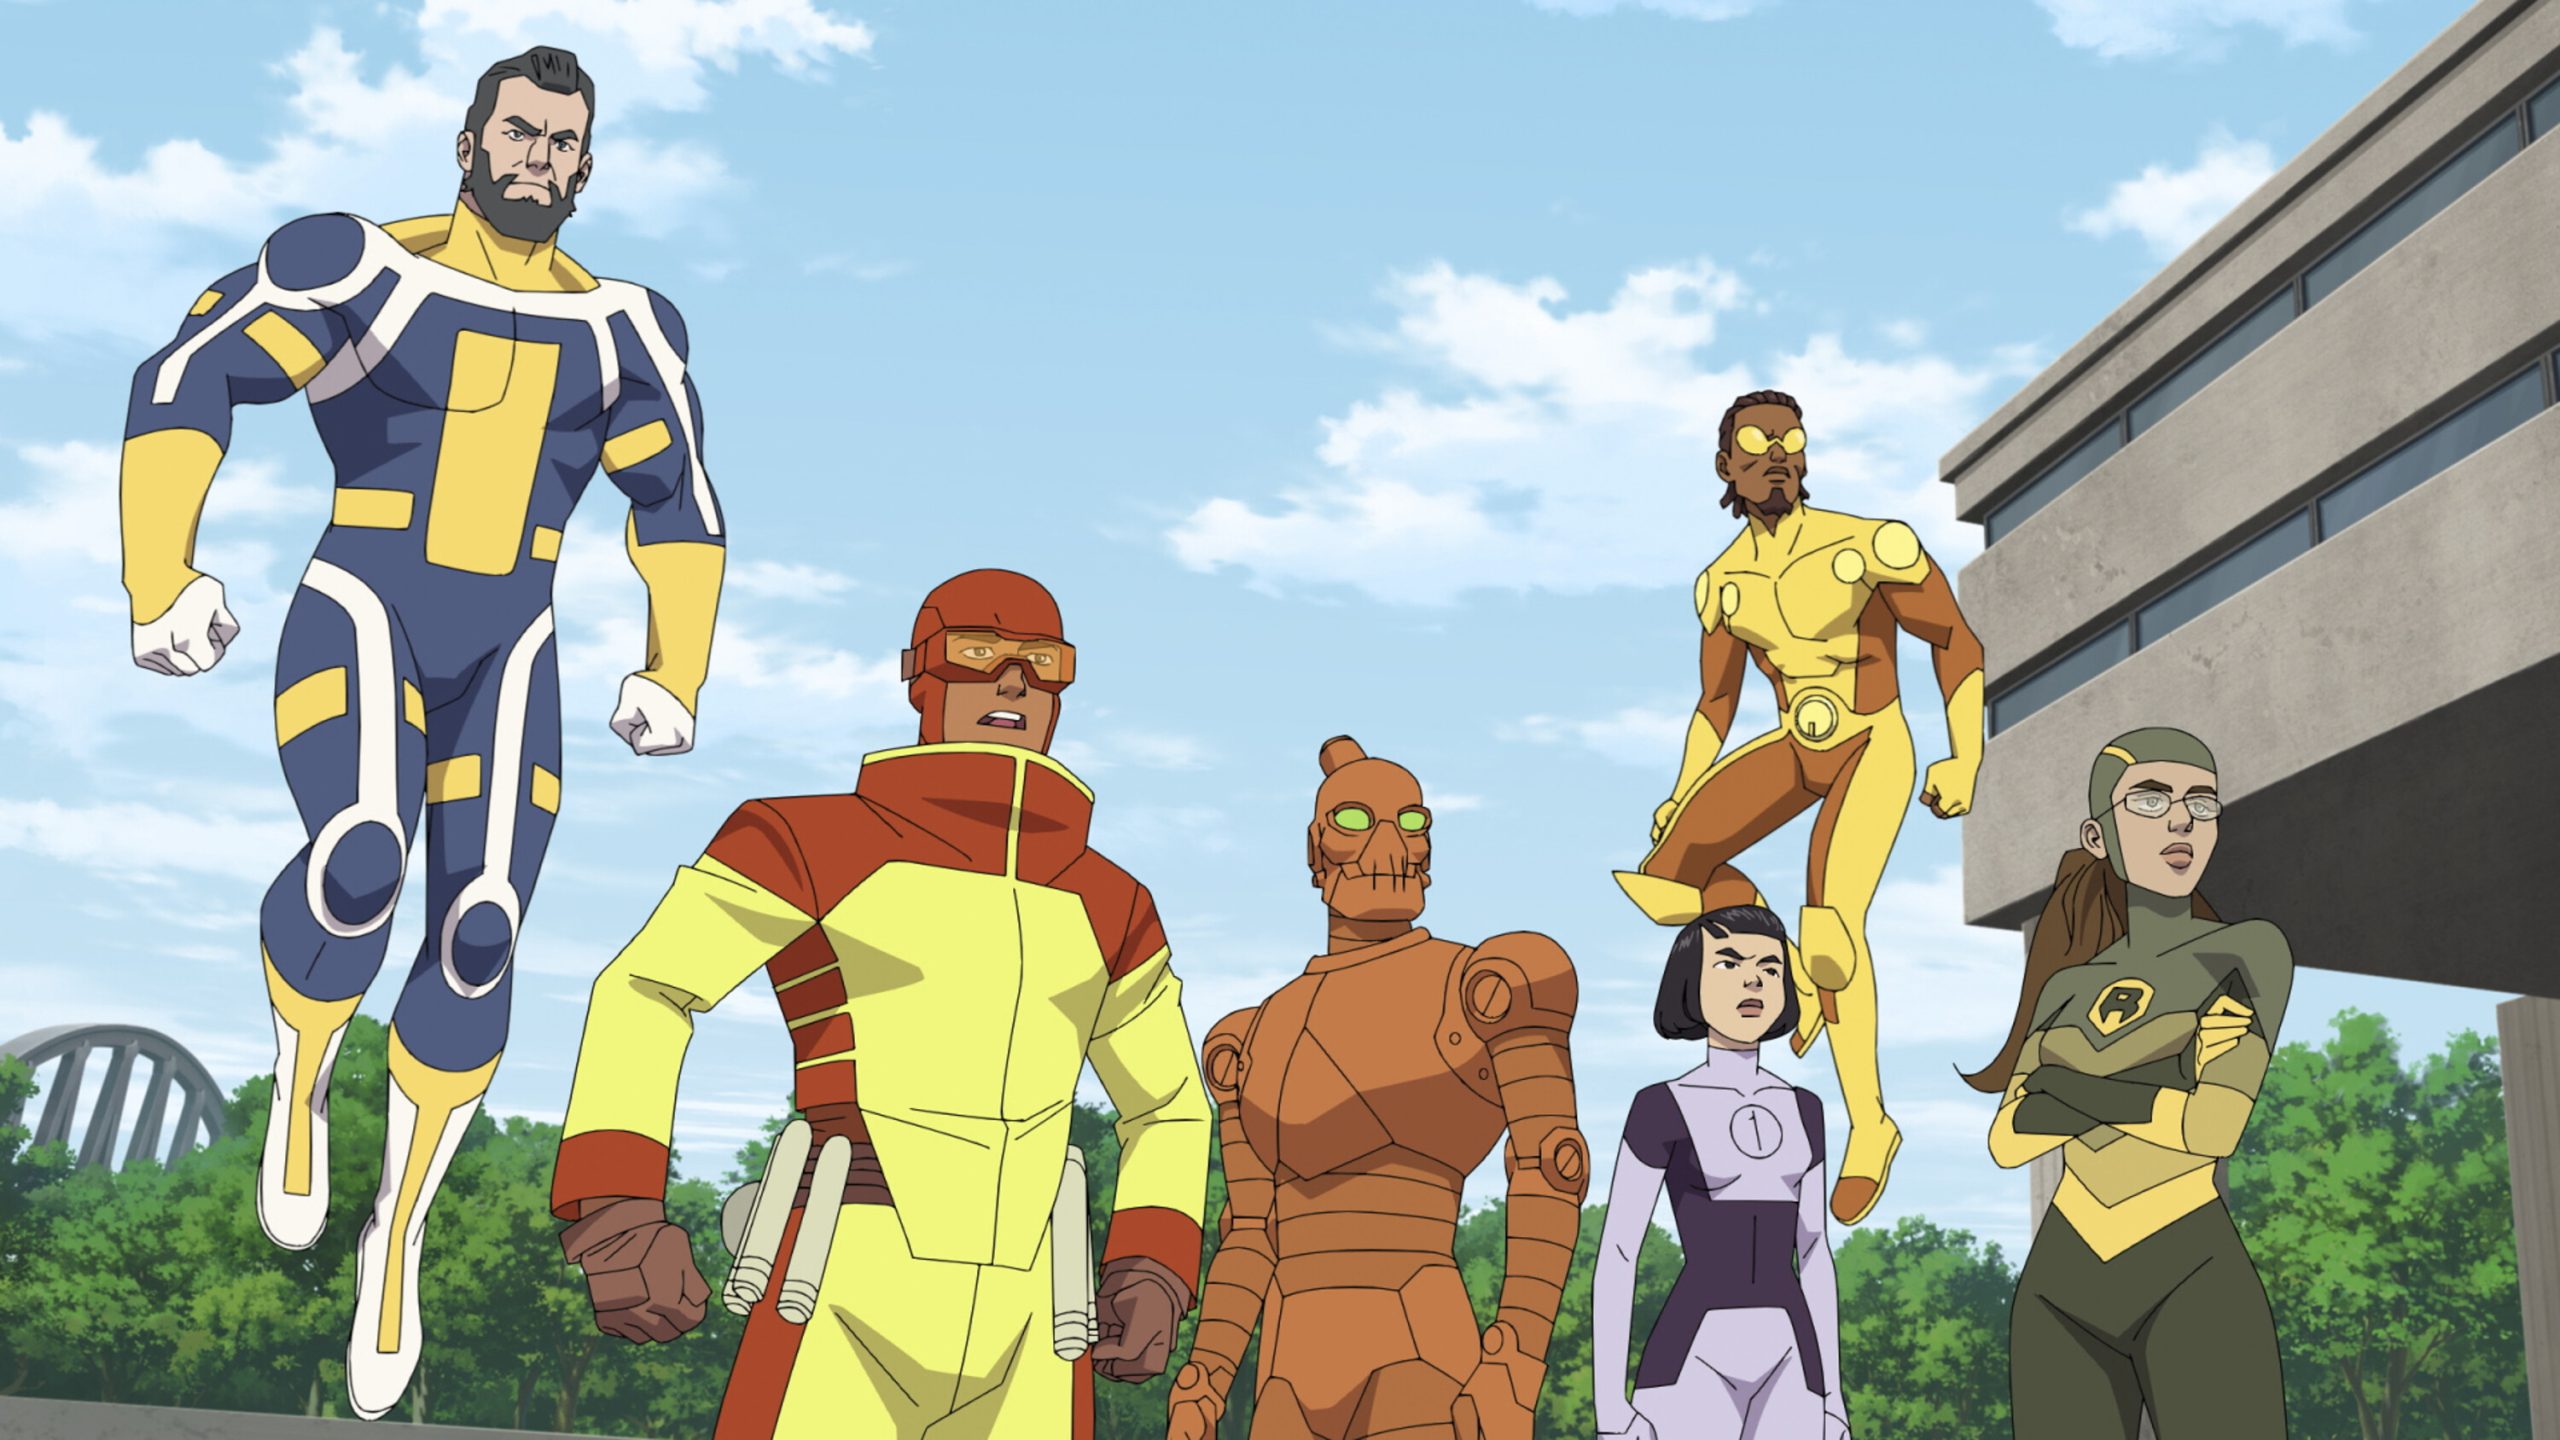 L to R: Ross Marquand as The Immortal, Jason Mantzoukas as Rex Sloan/Rex Splode, Zachary Quinto/Ross Marquand as Rudolph "Rudy" Connors/Robot, Malese Jow as Kate Cha/Dupli-Kate, Jay Pharoah as Bulletproof, and Grey Griffin as Shrinking Rae in Invincible S2 Part One (Copyright: Amazon Studios)